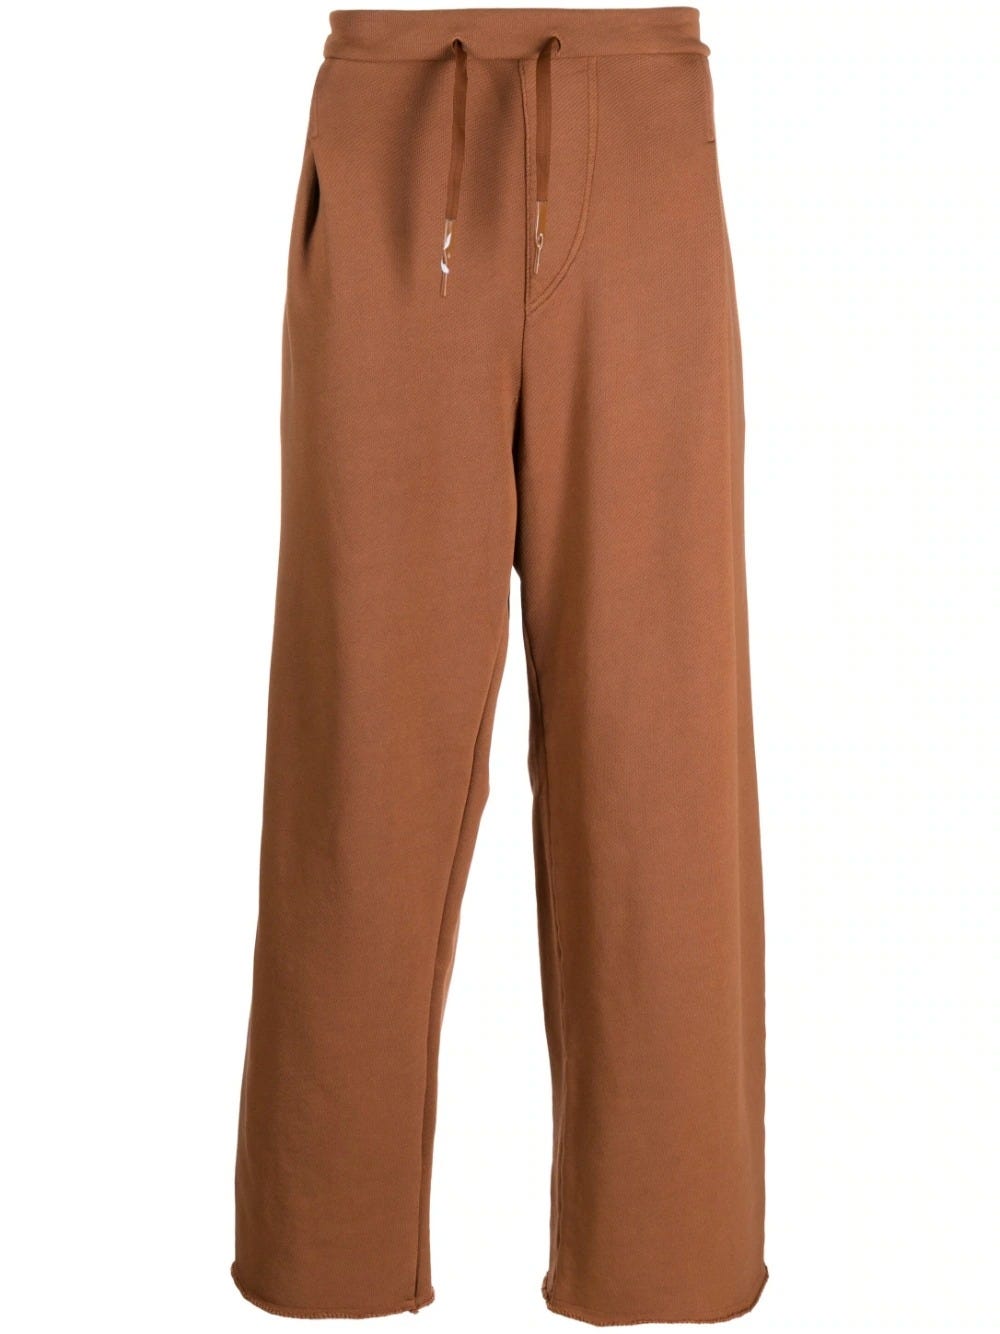 A PAPER KID BROWN SPORTS TROUSERS